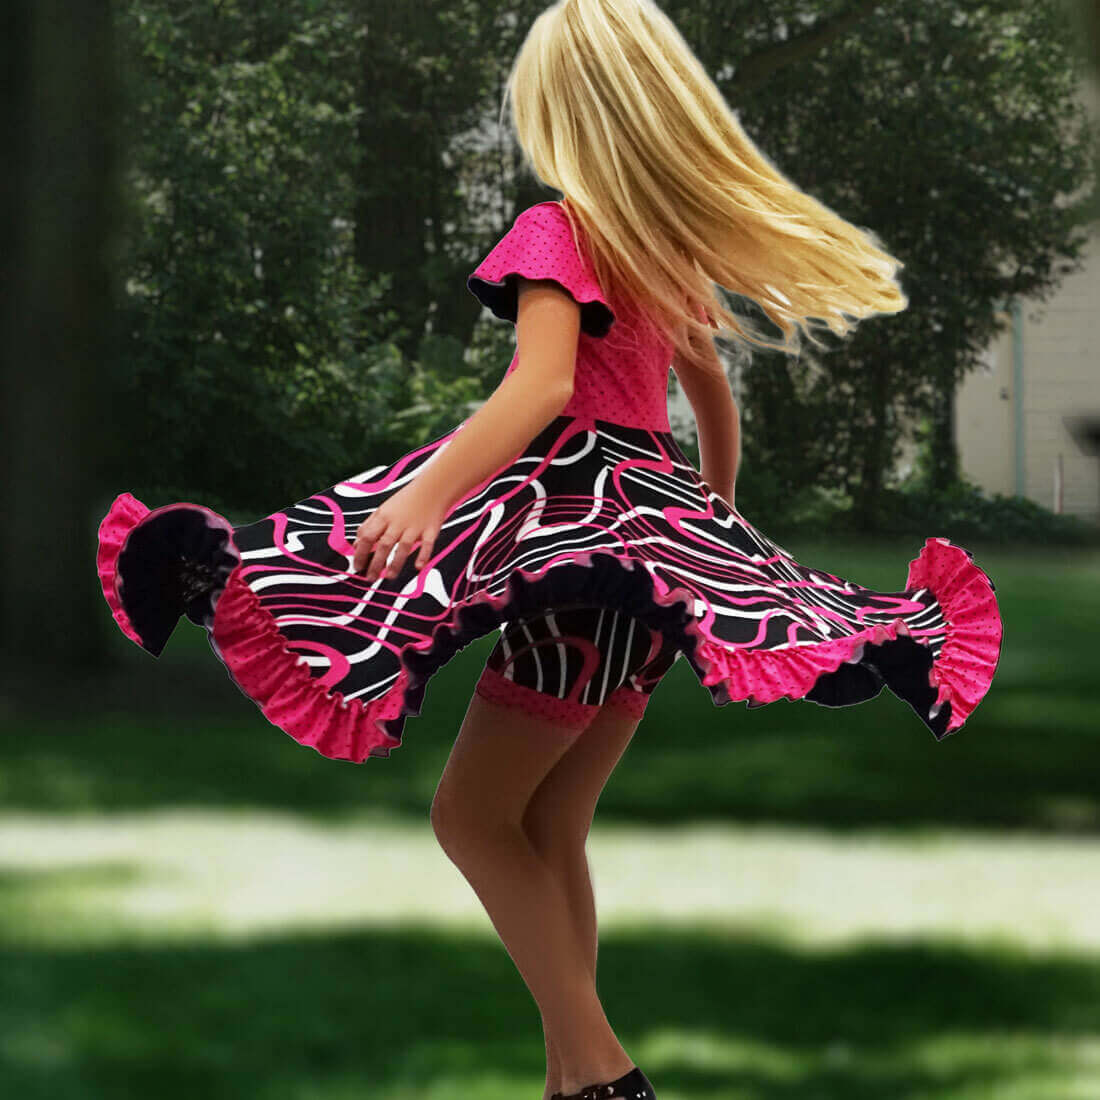 Girl spinning in a pink dress